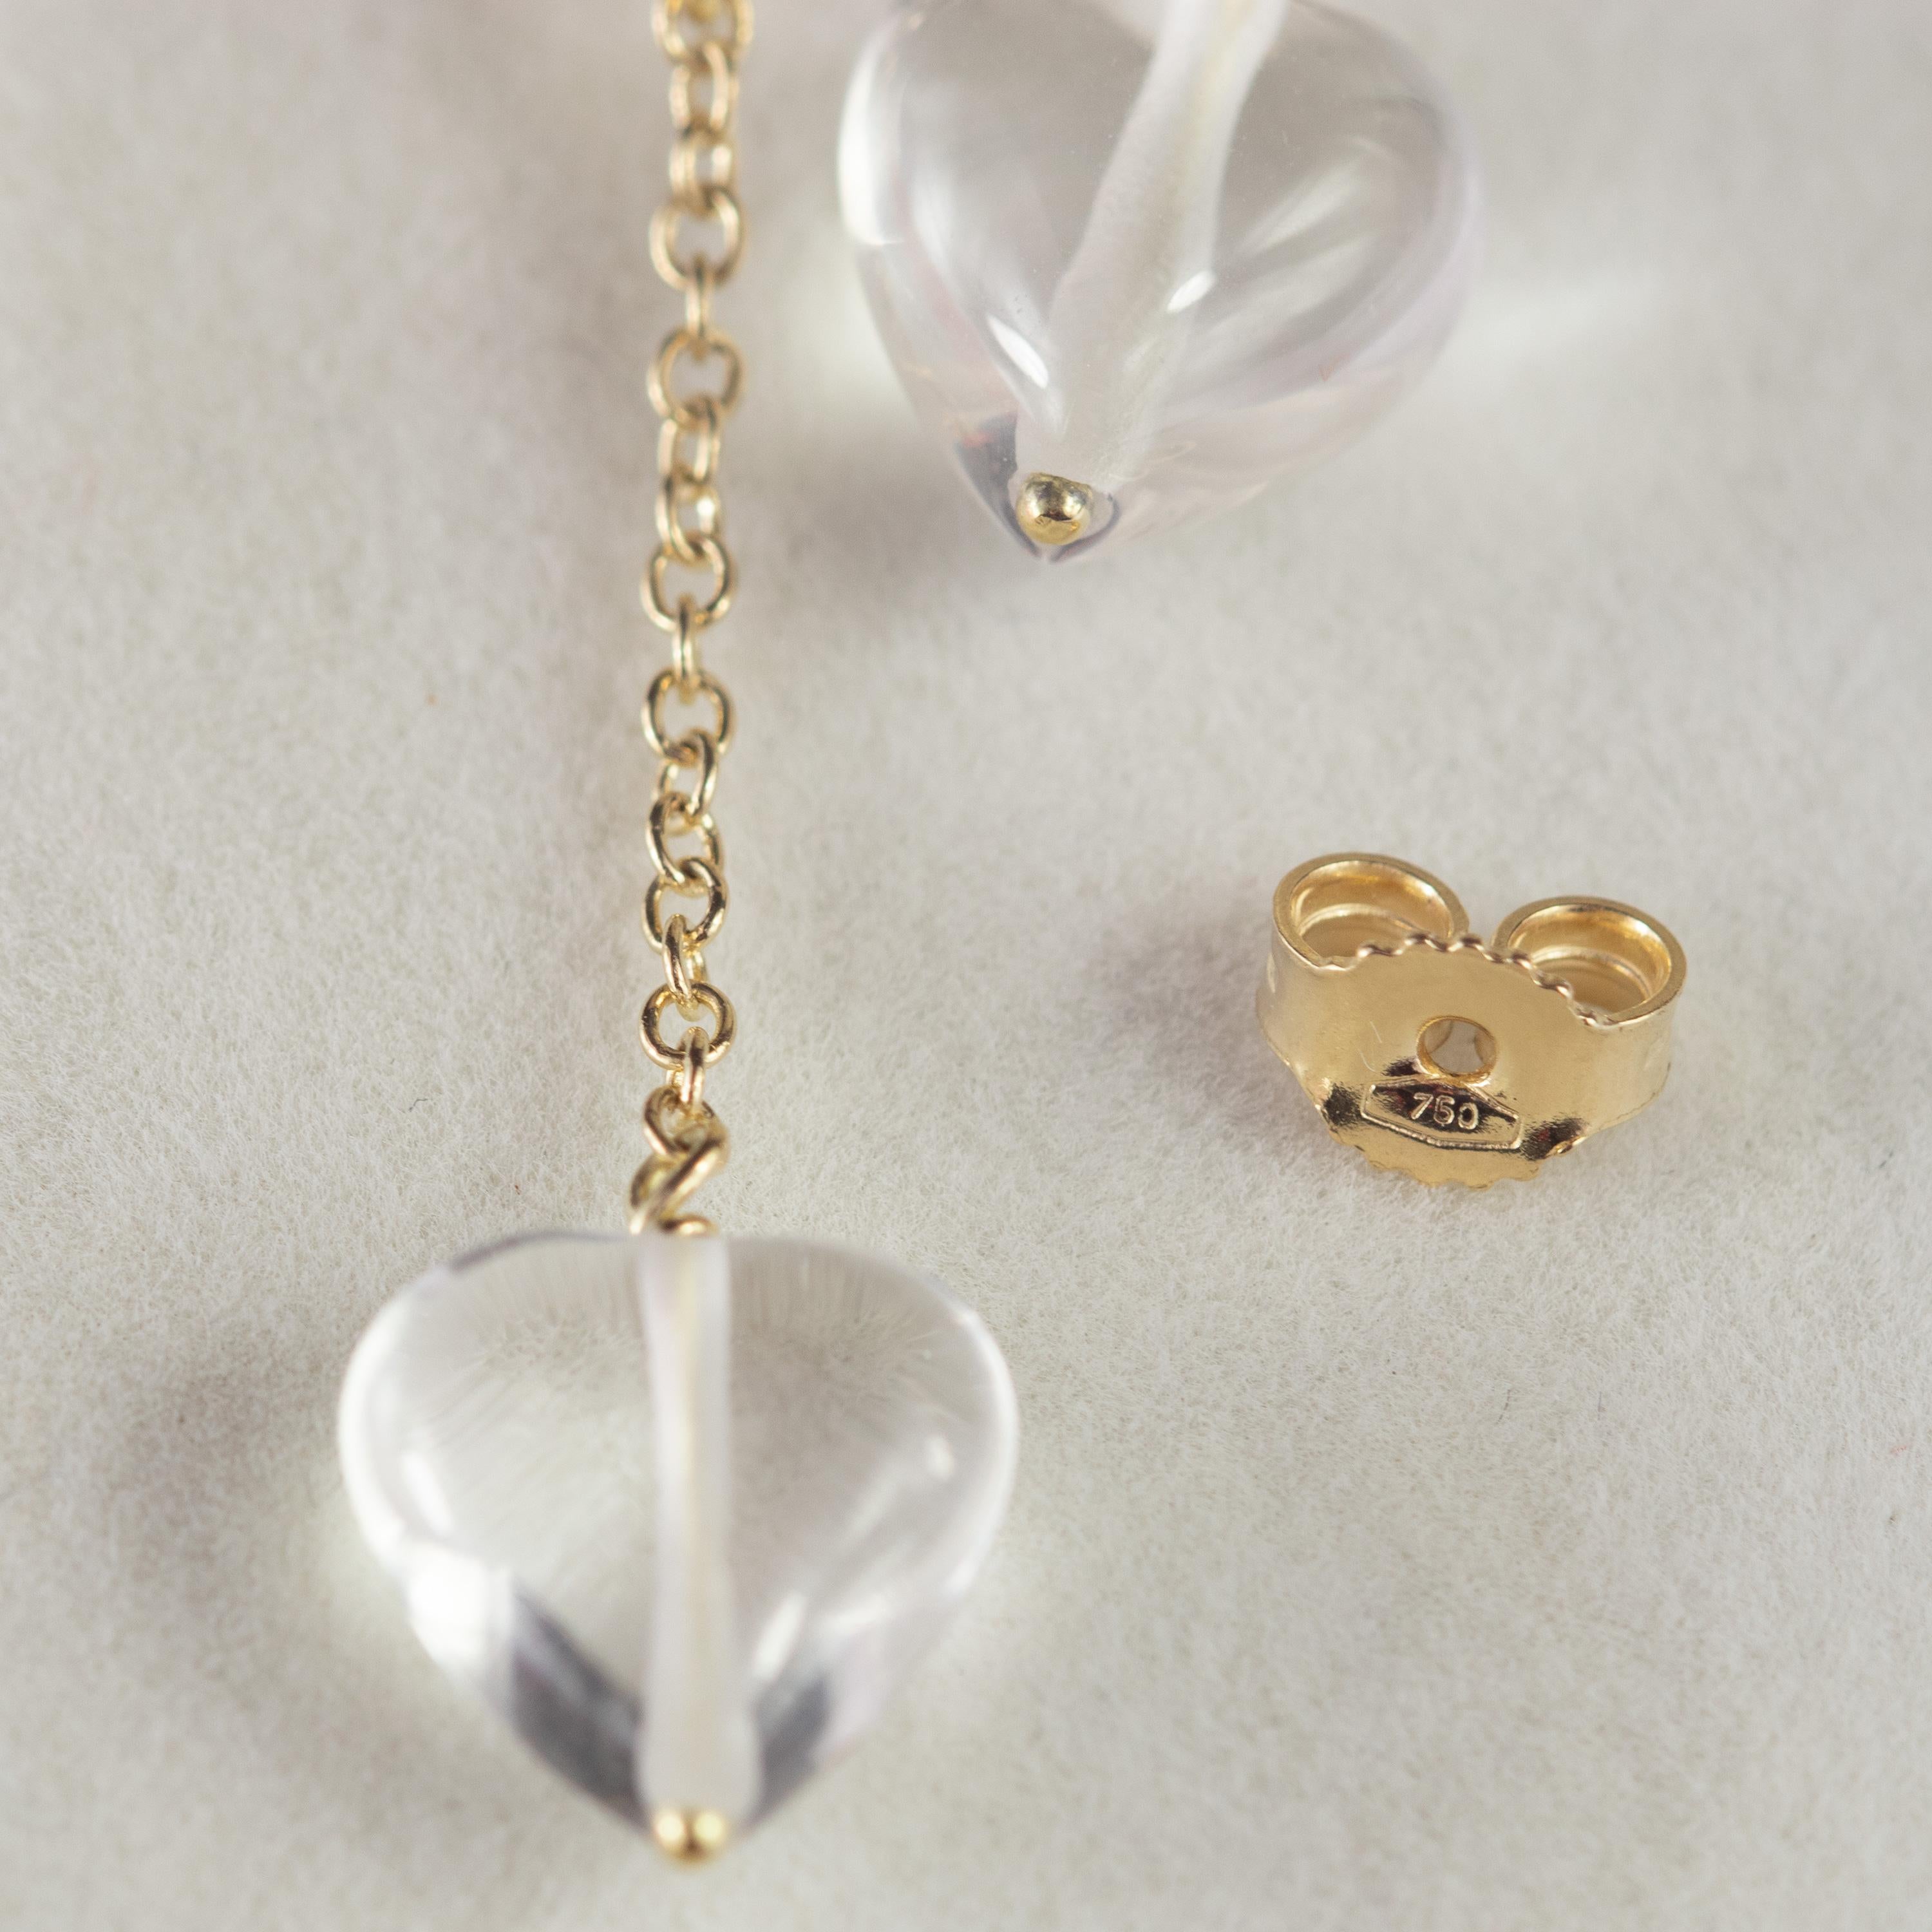 Romantic Heart Crystal Rock 18 Karat Yellow Gold Dangle Chic Valentine's Day Earrings For Sale